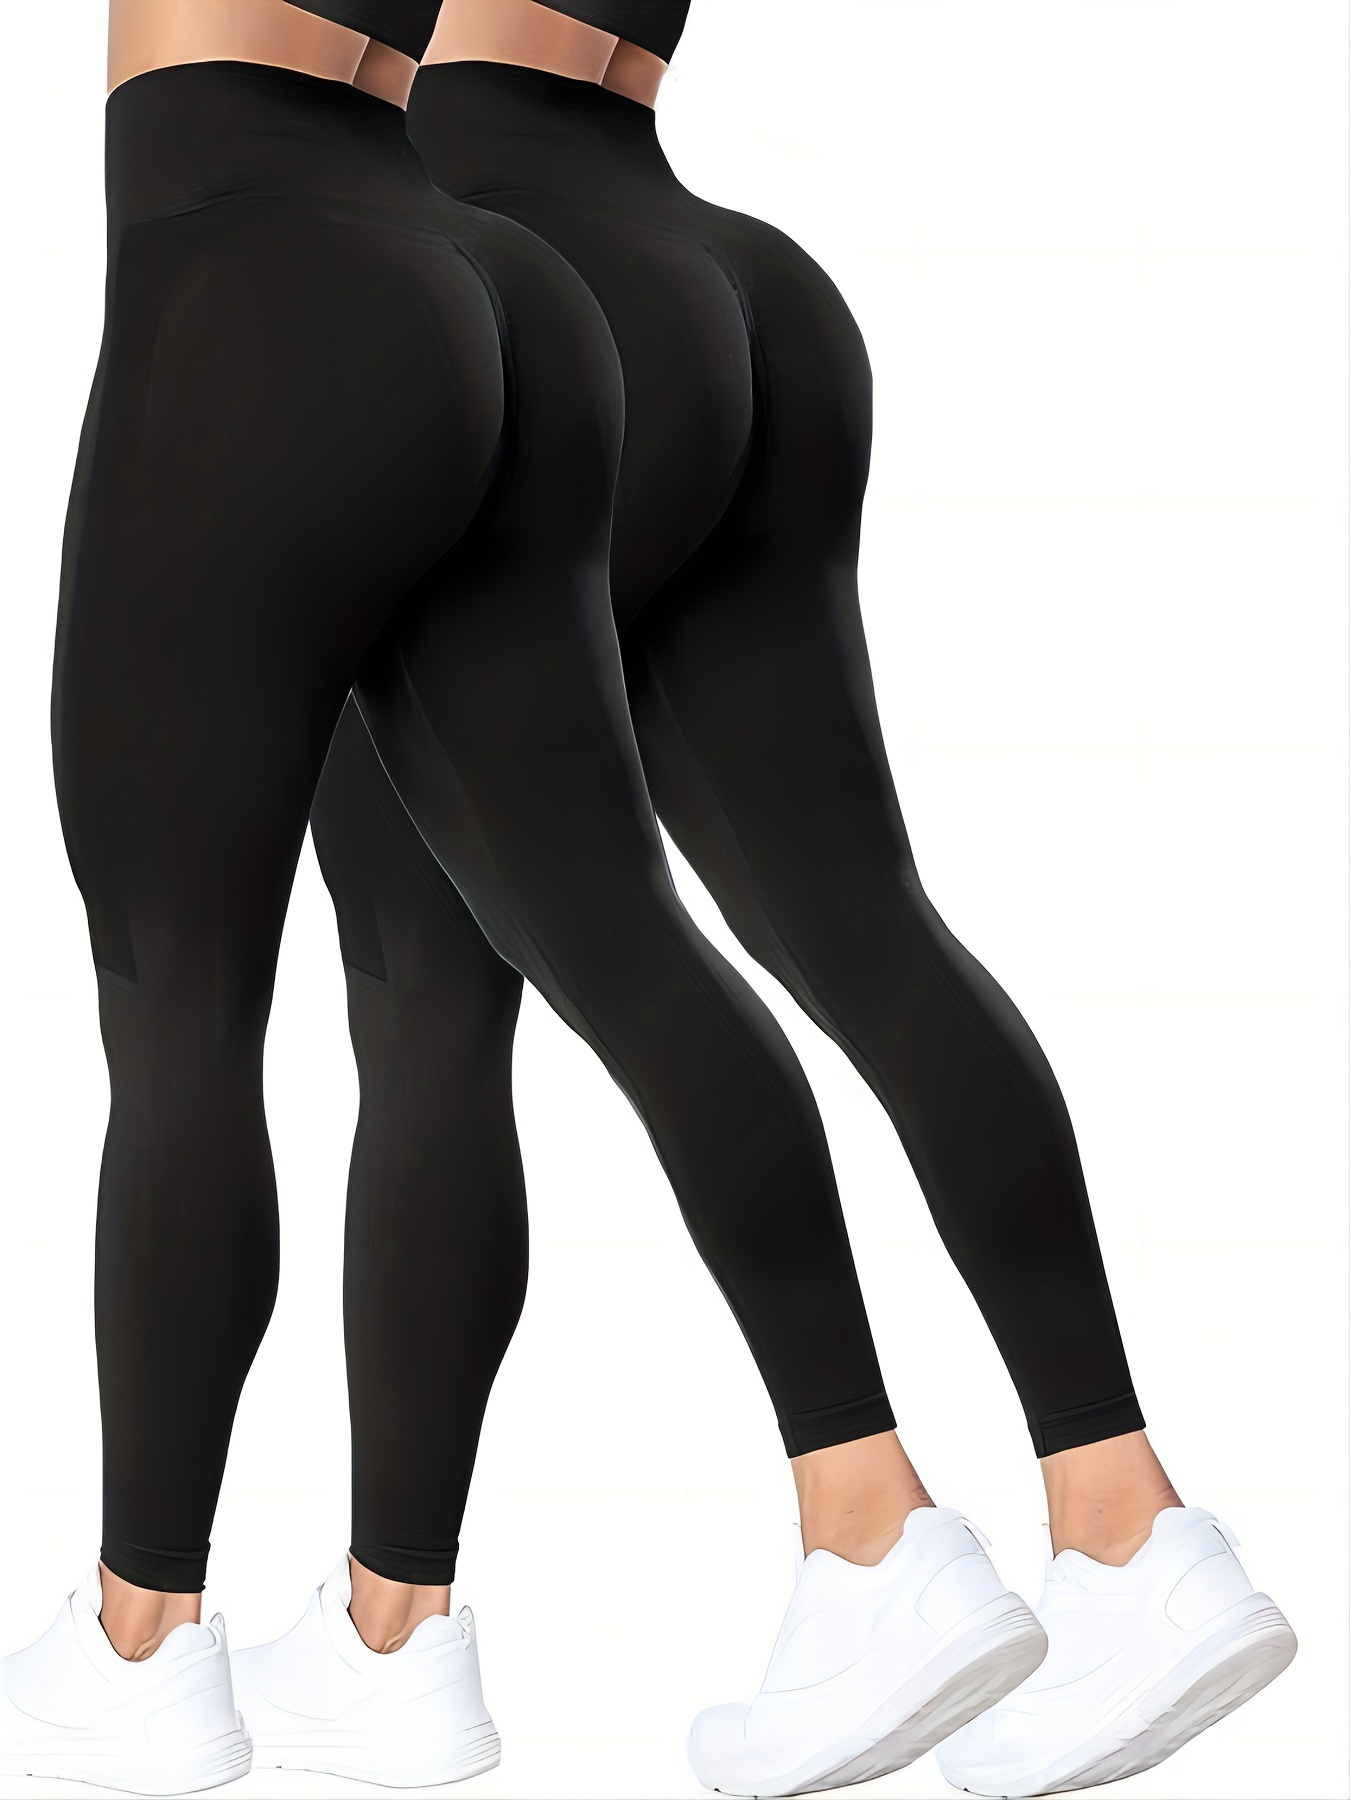 High Waisted, tummy control, breathable leggings, buttery soft